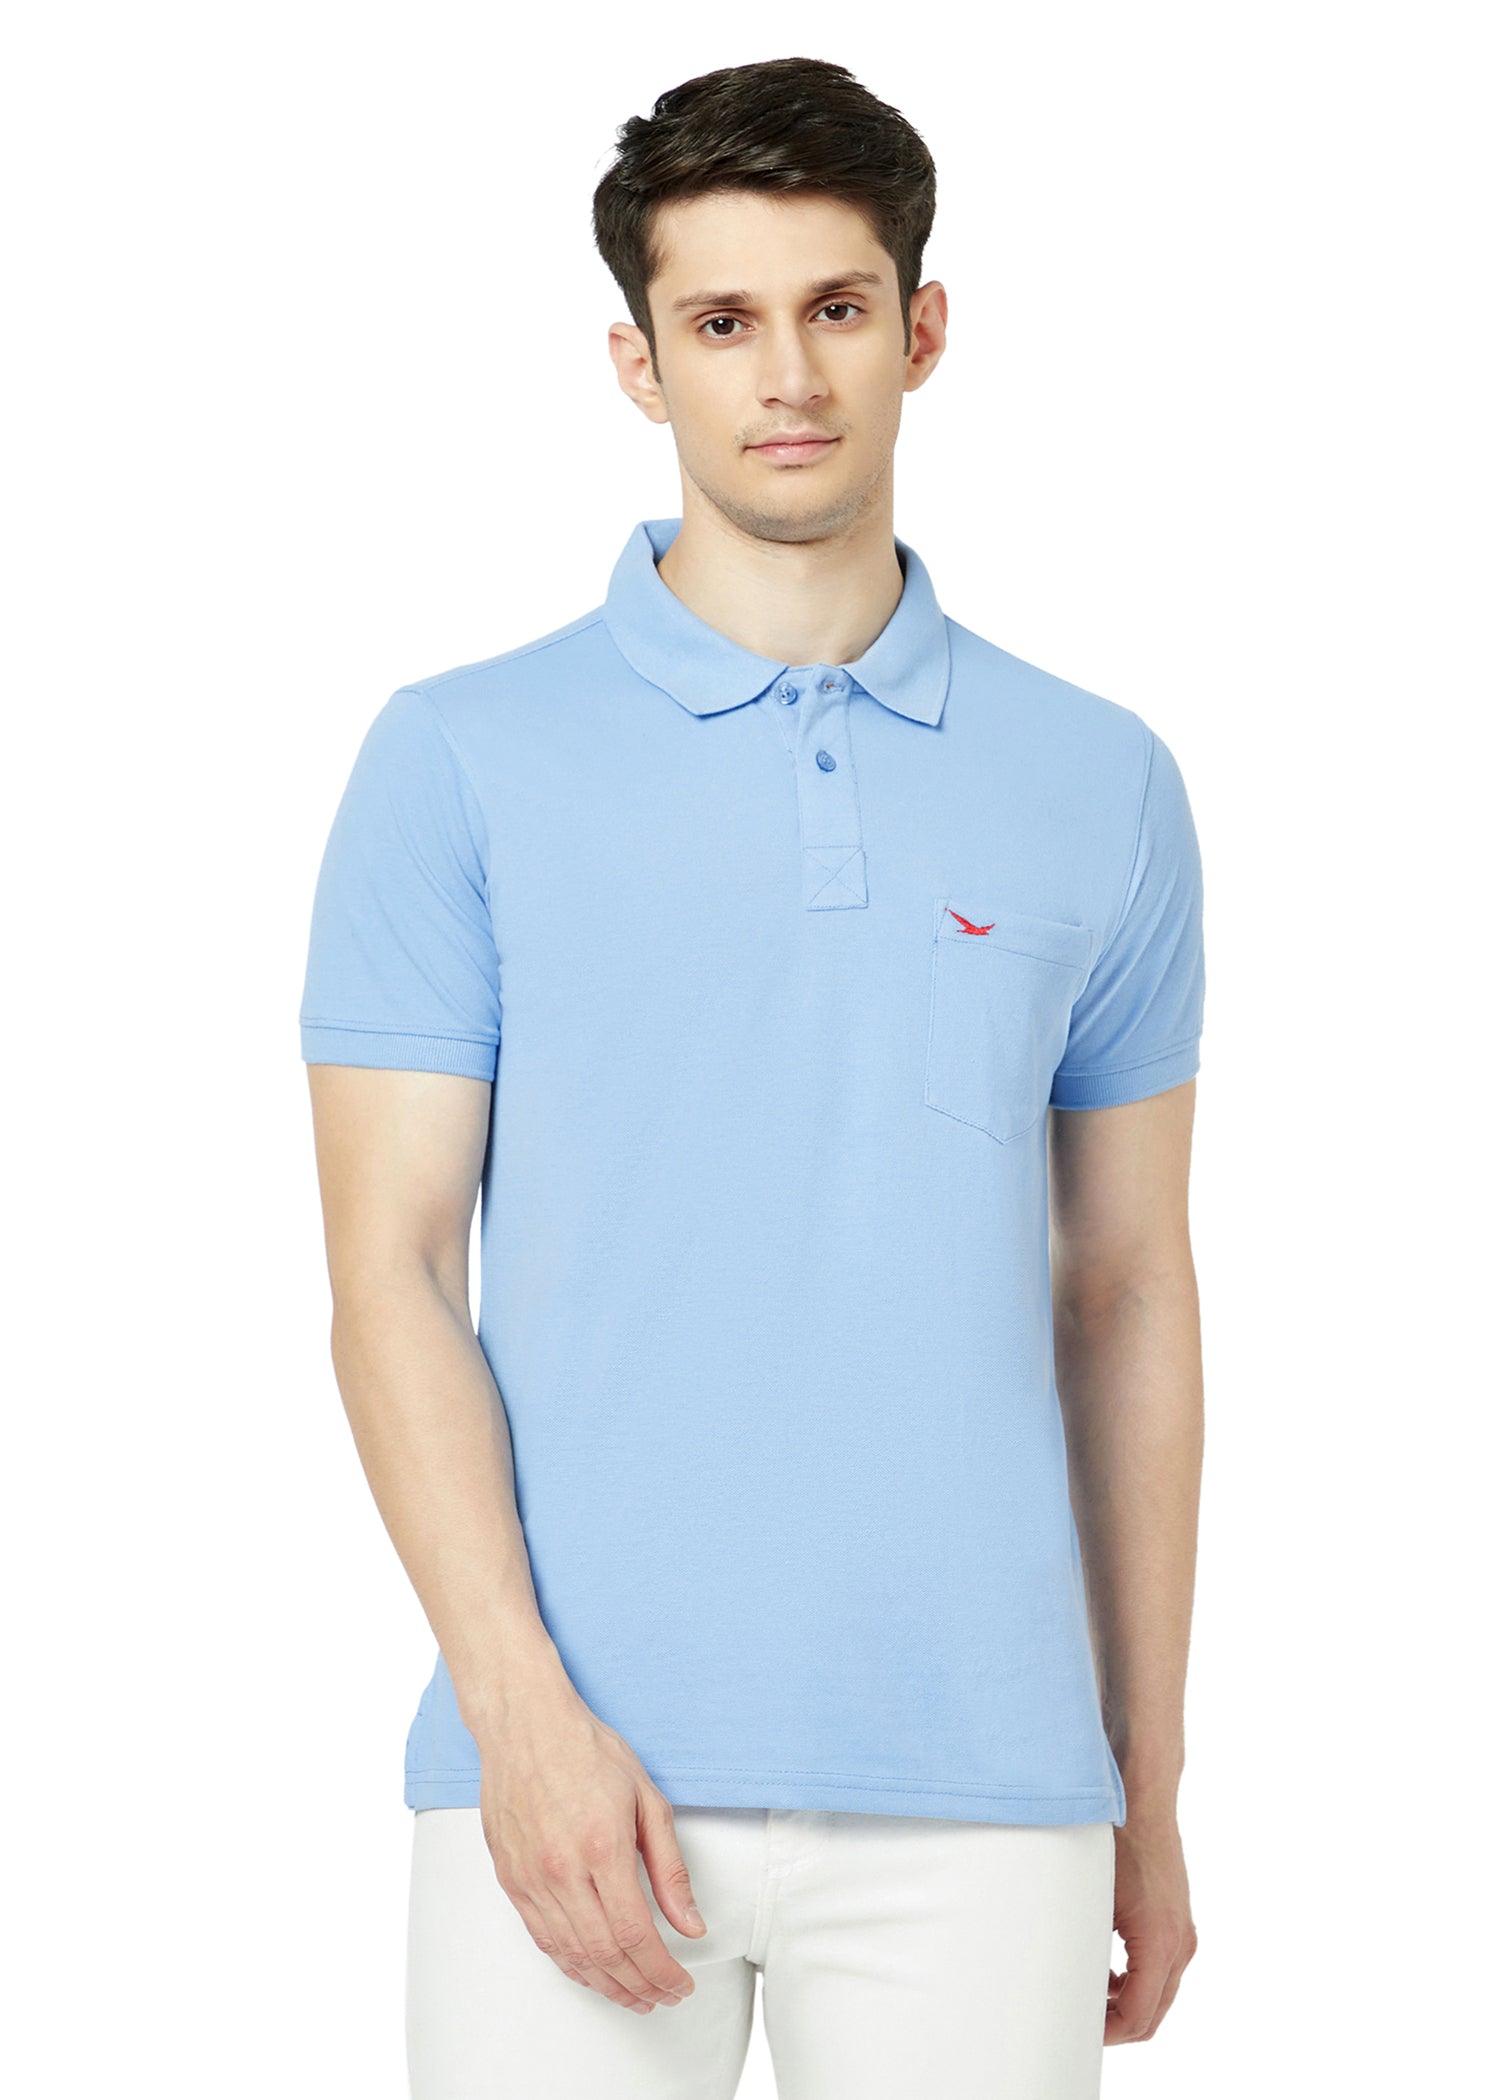 Hiflyers Men'S Solid Regular Fit Polo T-Shirt With Pocket -Light Sky Blue